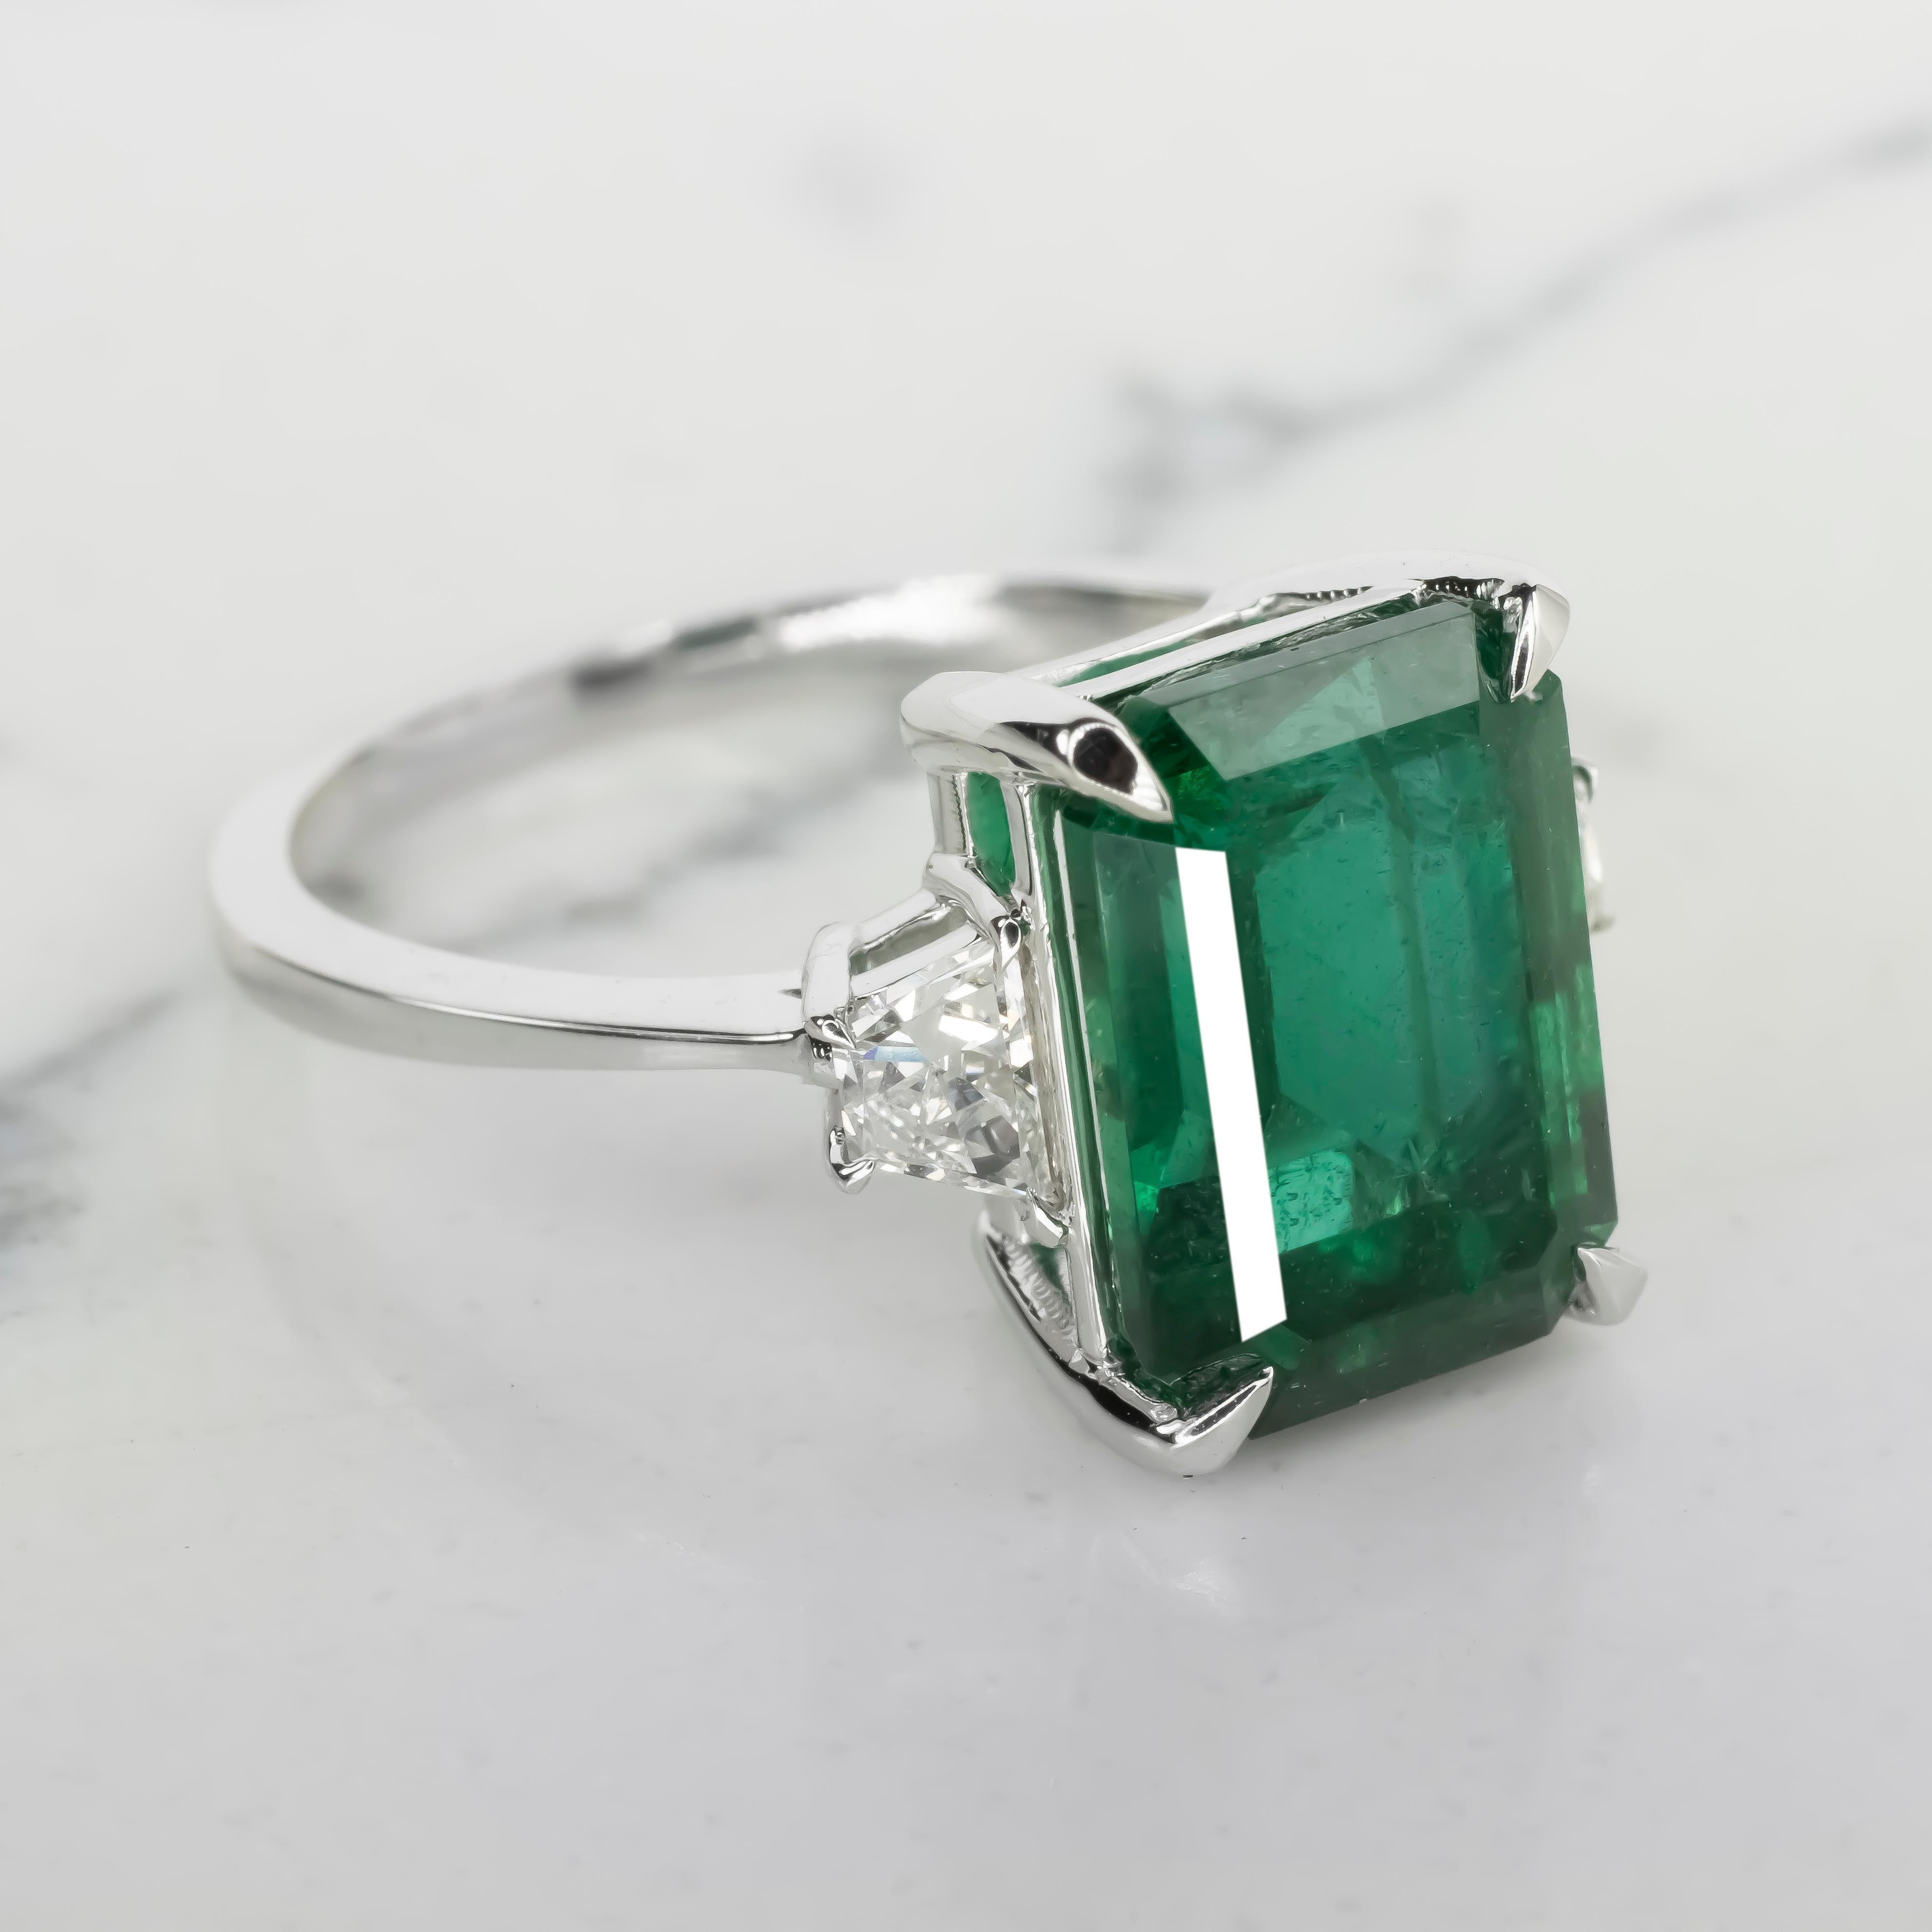 Presenting a truly remarkable piece, this ring holds a captivating allure with its centerpiece—a dazzling 13 carat shape emerald Zambian emerald, certified by the AGL Embraced by two trapezoid white-shaped diamonds weighing a total of 1 carat, this